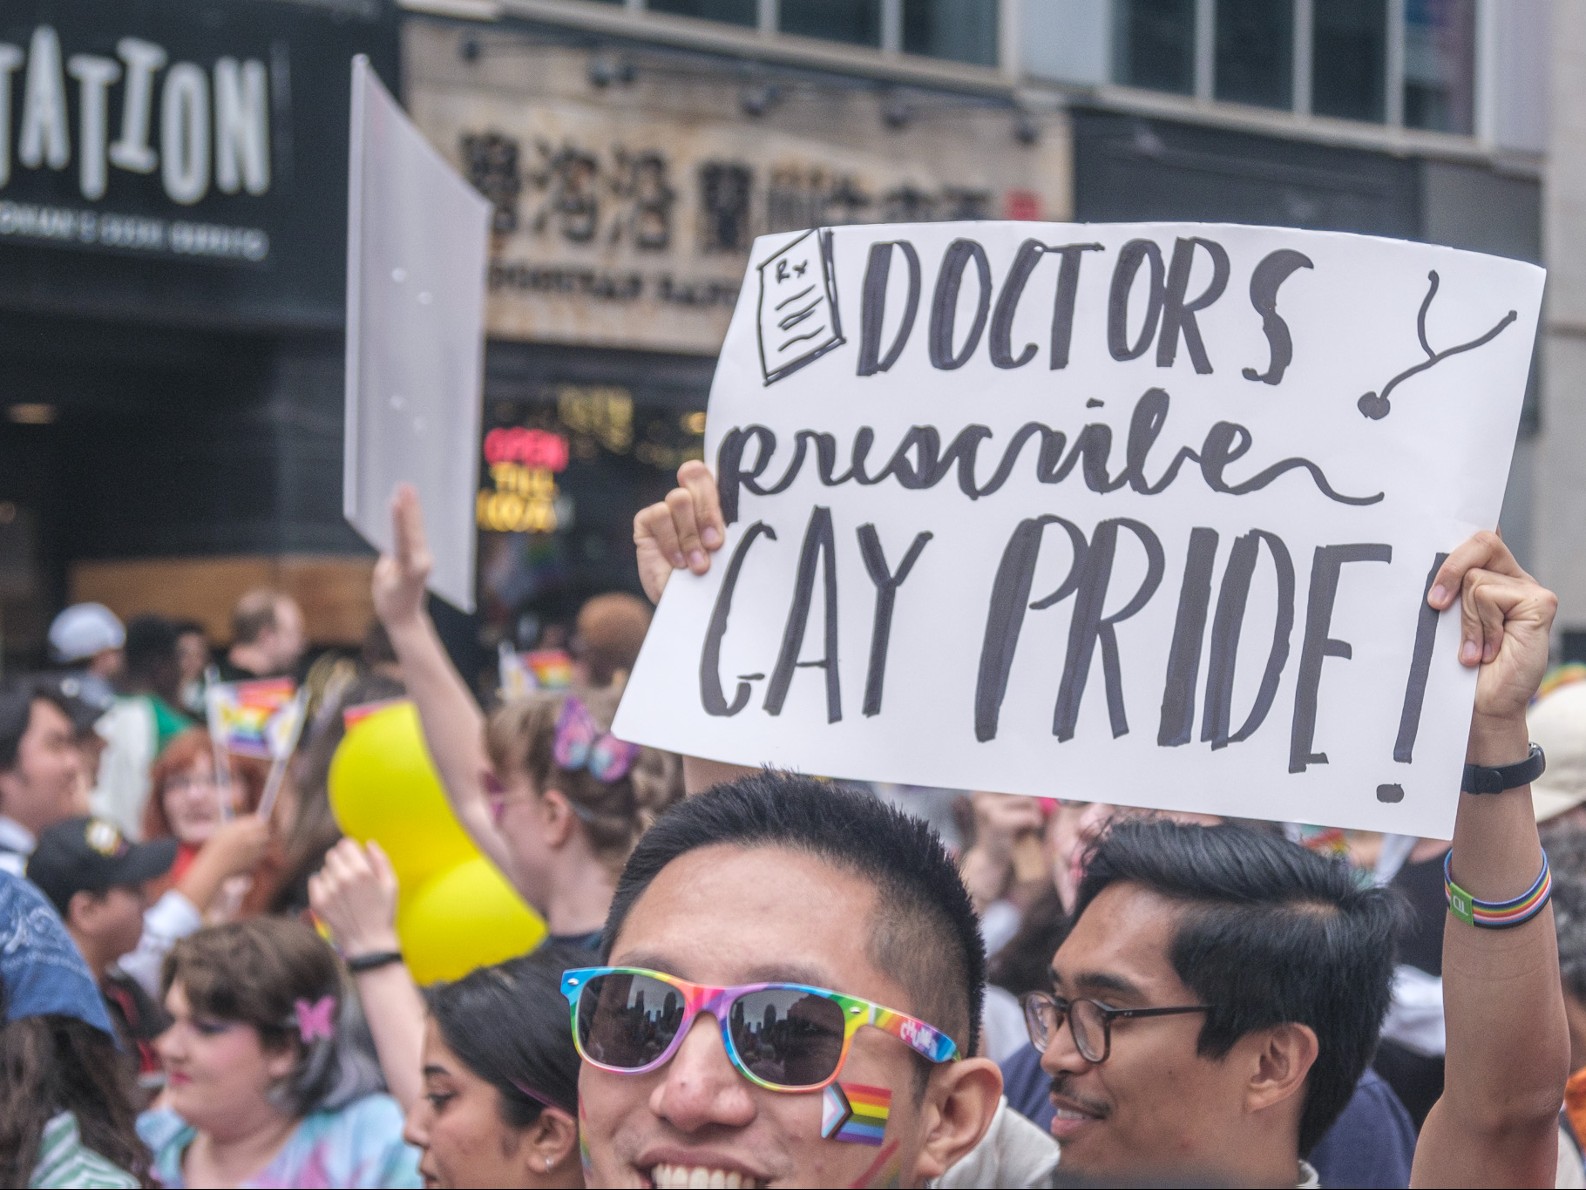 A man wearing rainbow sunglasses with a Pride flag tattooed on his cheek smiles while a man behind him holds up a sign reading, ”DOCTORS prescribe GAY PRIDE!”